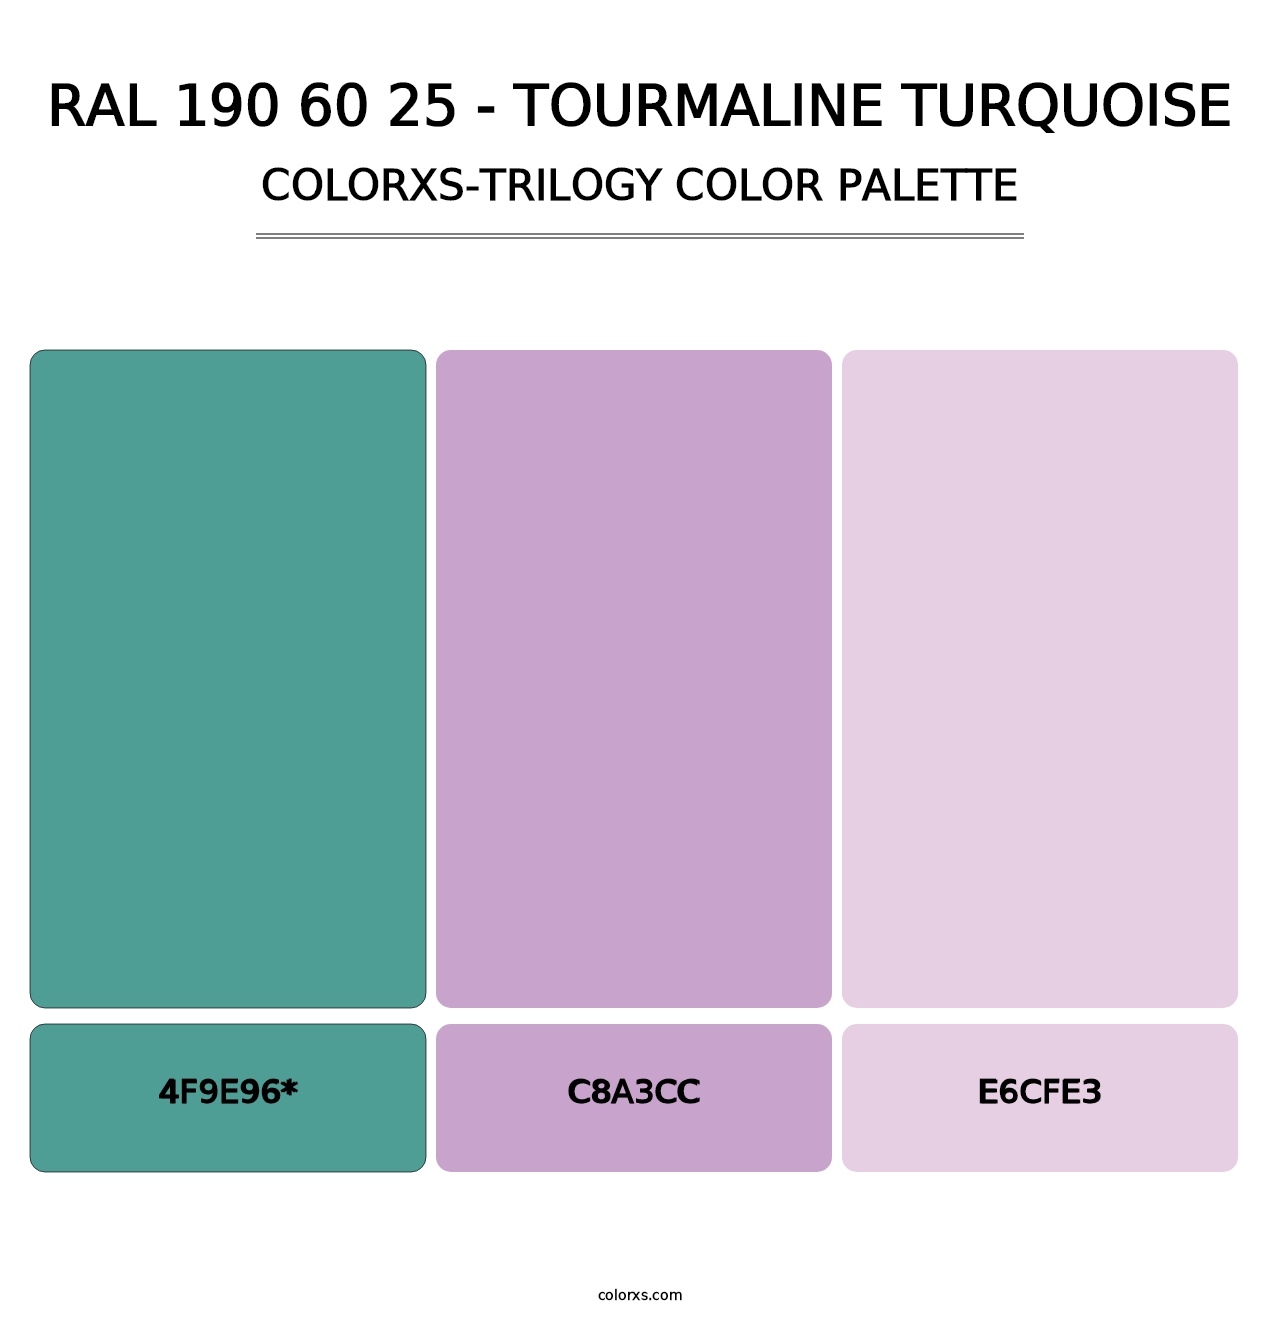 RAL 190 60 25 - Tourmaline Turquoise - Colorxs Trilogy Palette